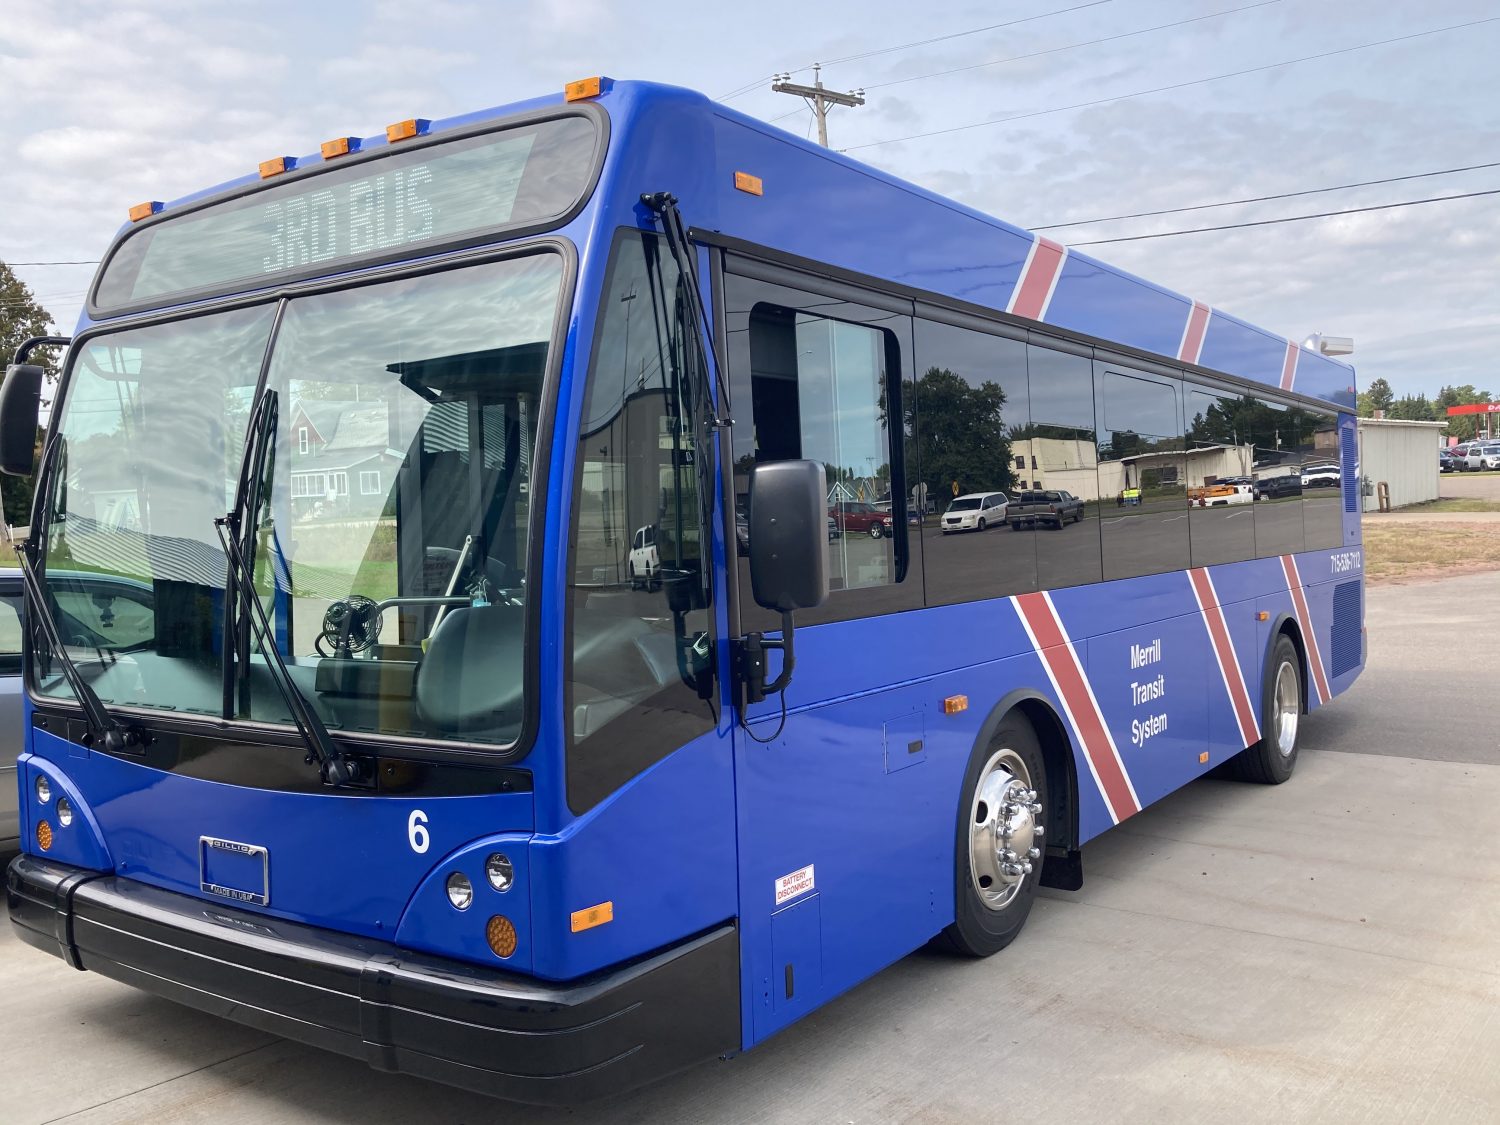 Merrill-Go-Round welcomes new additions to bus fleet